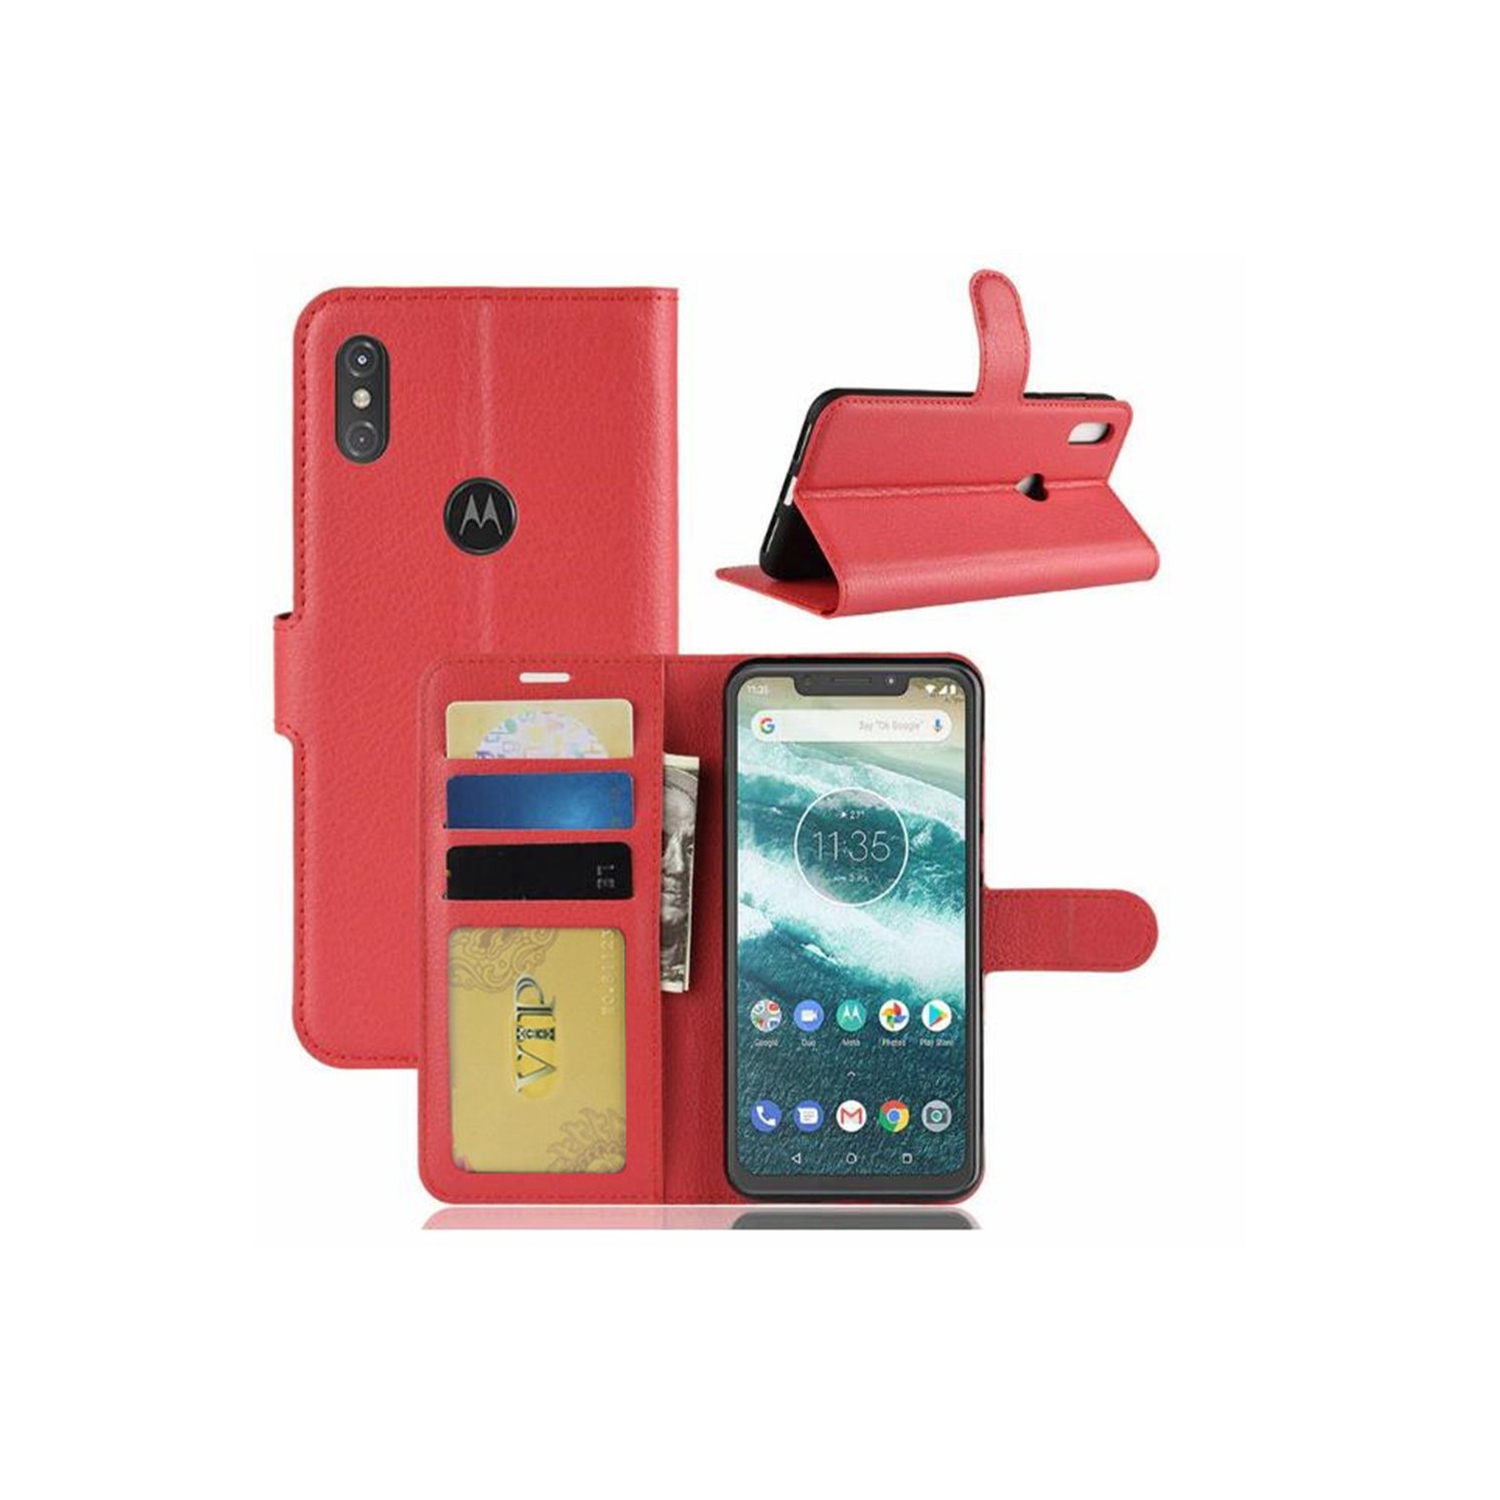 [CS] Motorola Moto One Vision Case, Magnetic Leather Folio Wallet Flip Case Cover with Card Slot, Red